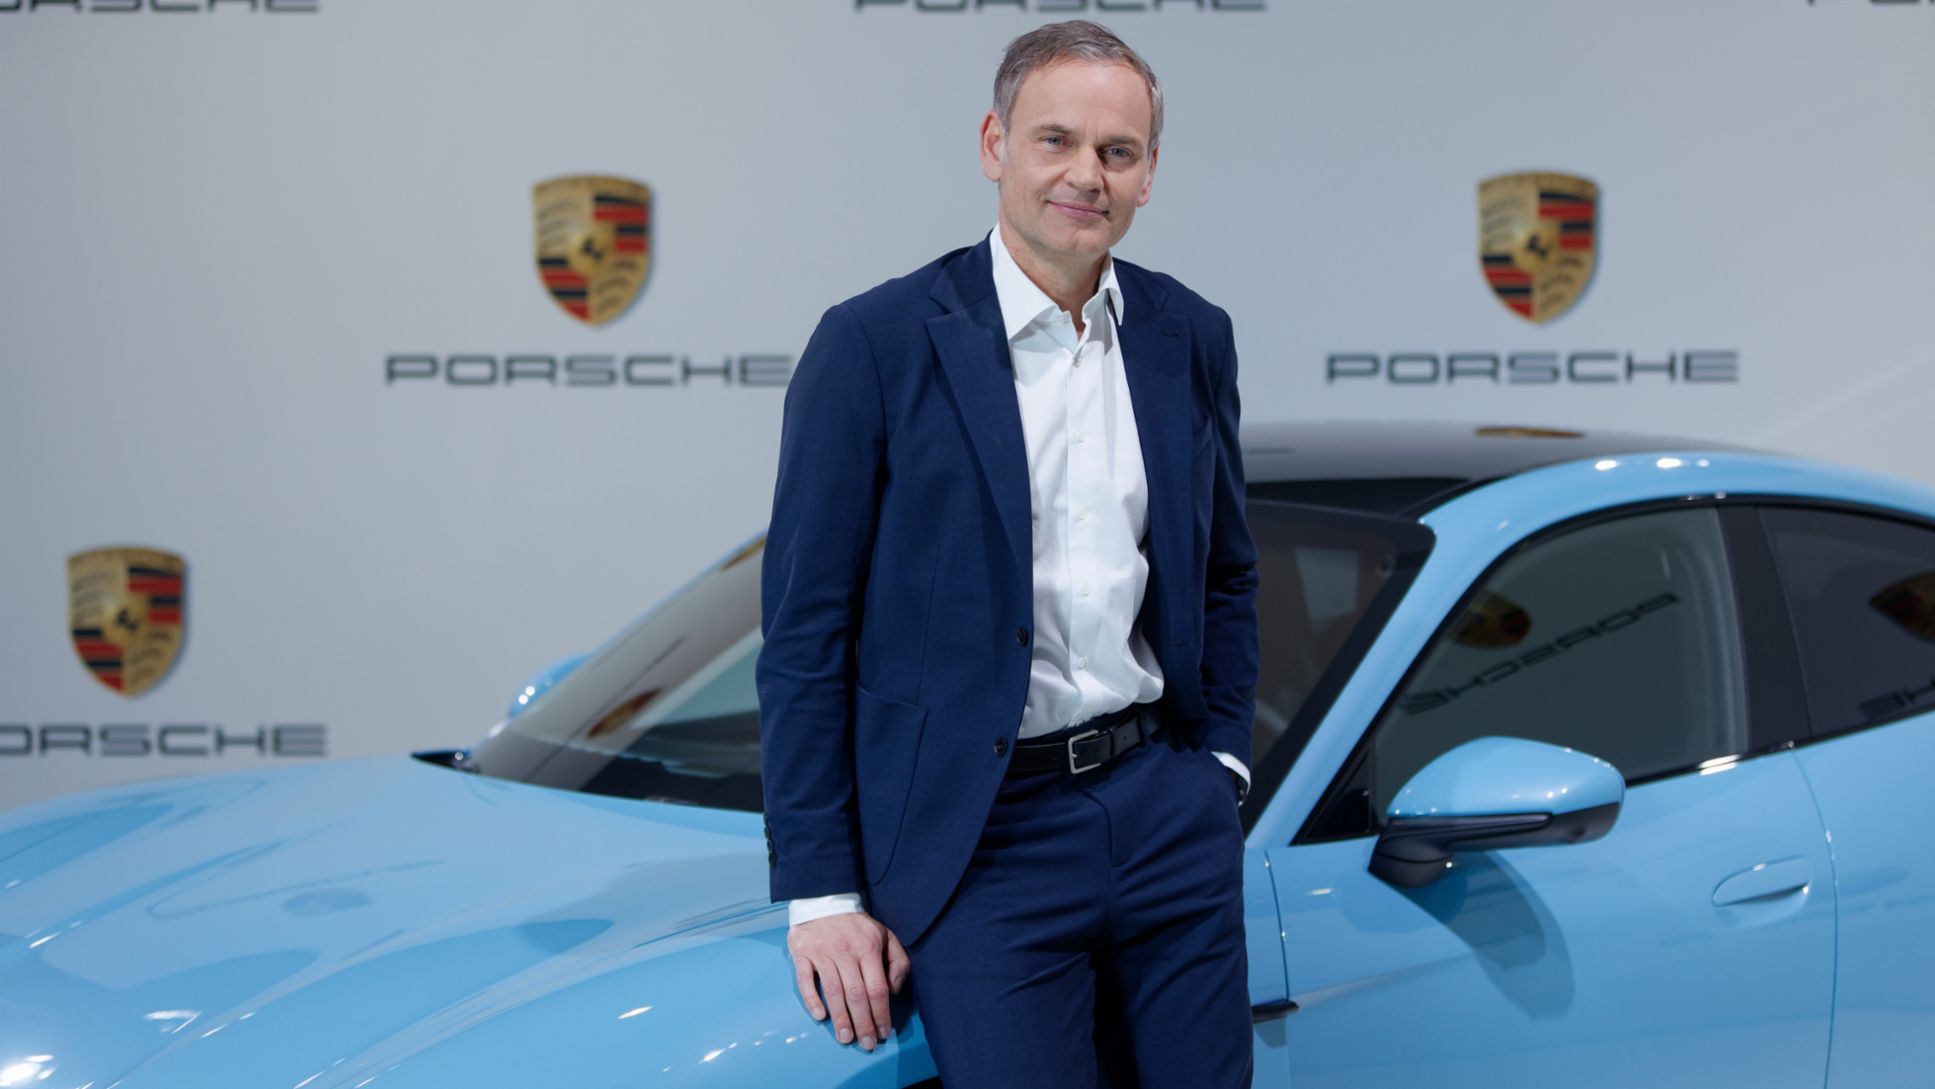 Oliver Blume, Chairman of the Executive Board, annual press conference, 2020, Porsche AG